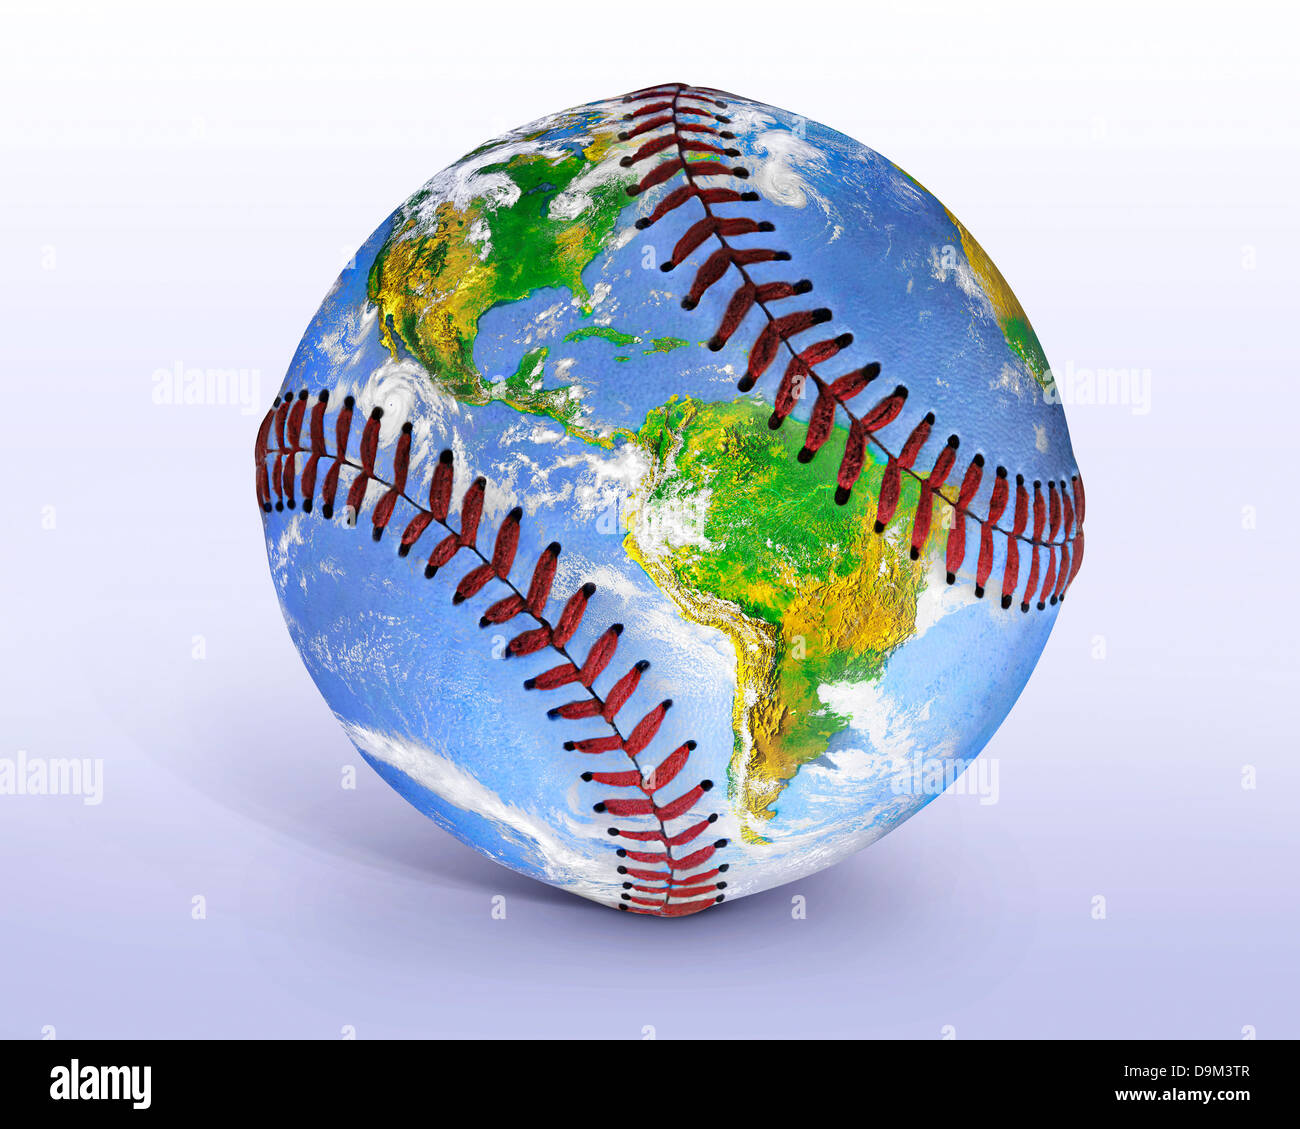 An Image Of The Earth From Space Seemingly Painted Onto A Baseball, Photo Illustration, This File Has A Clipping Path Stock Photo